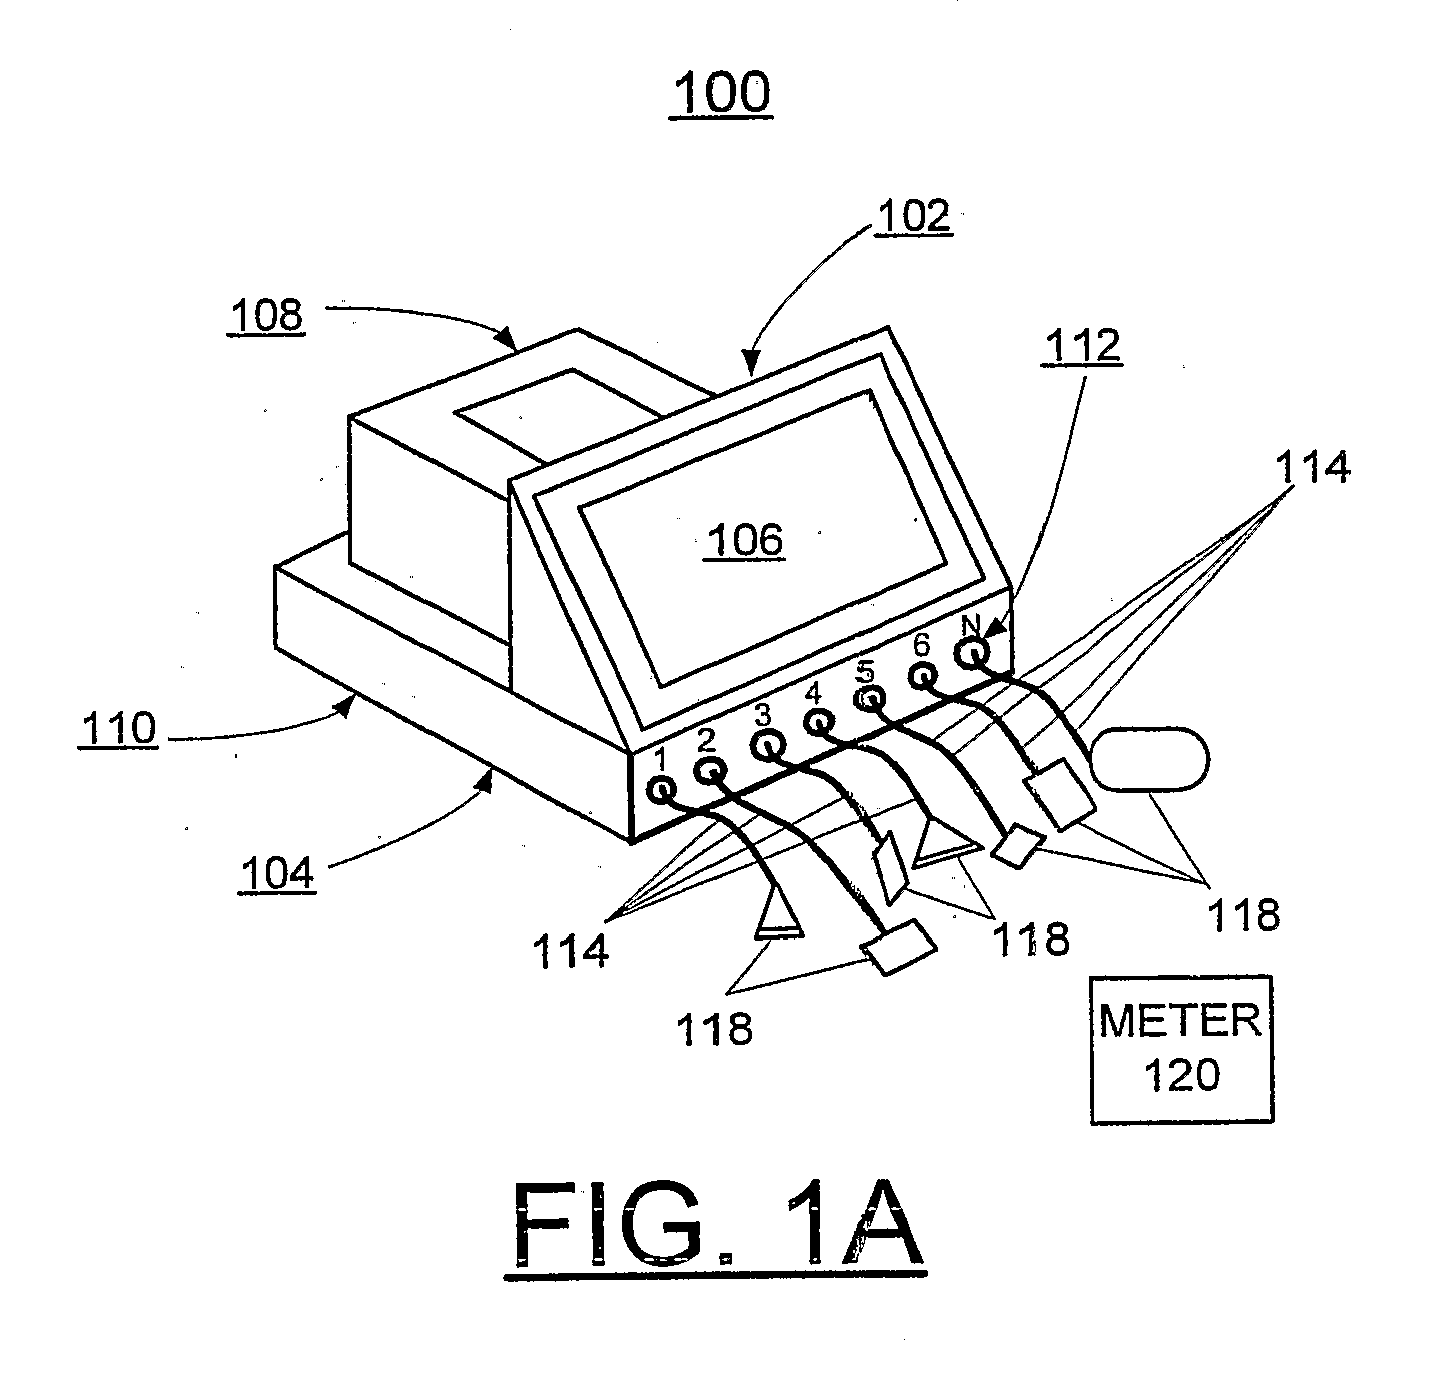 Method and Apparatus for Automatic Detection of Meter Connection and Transfer of Data